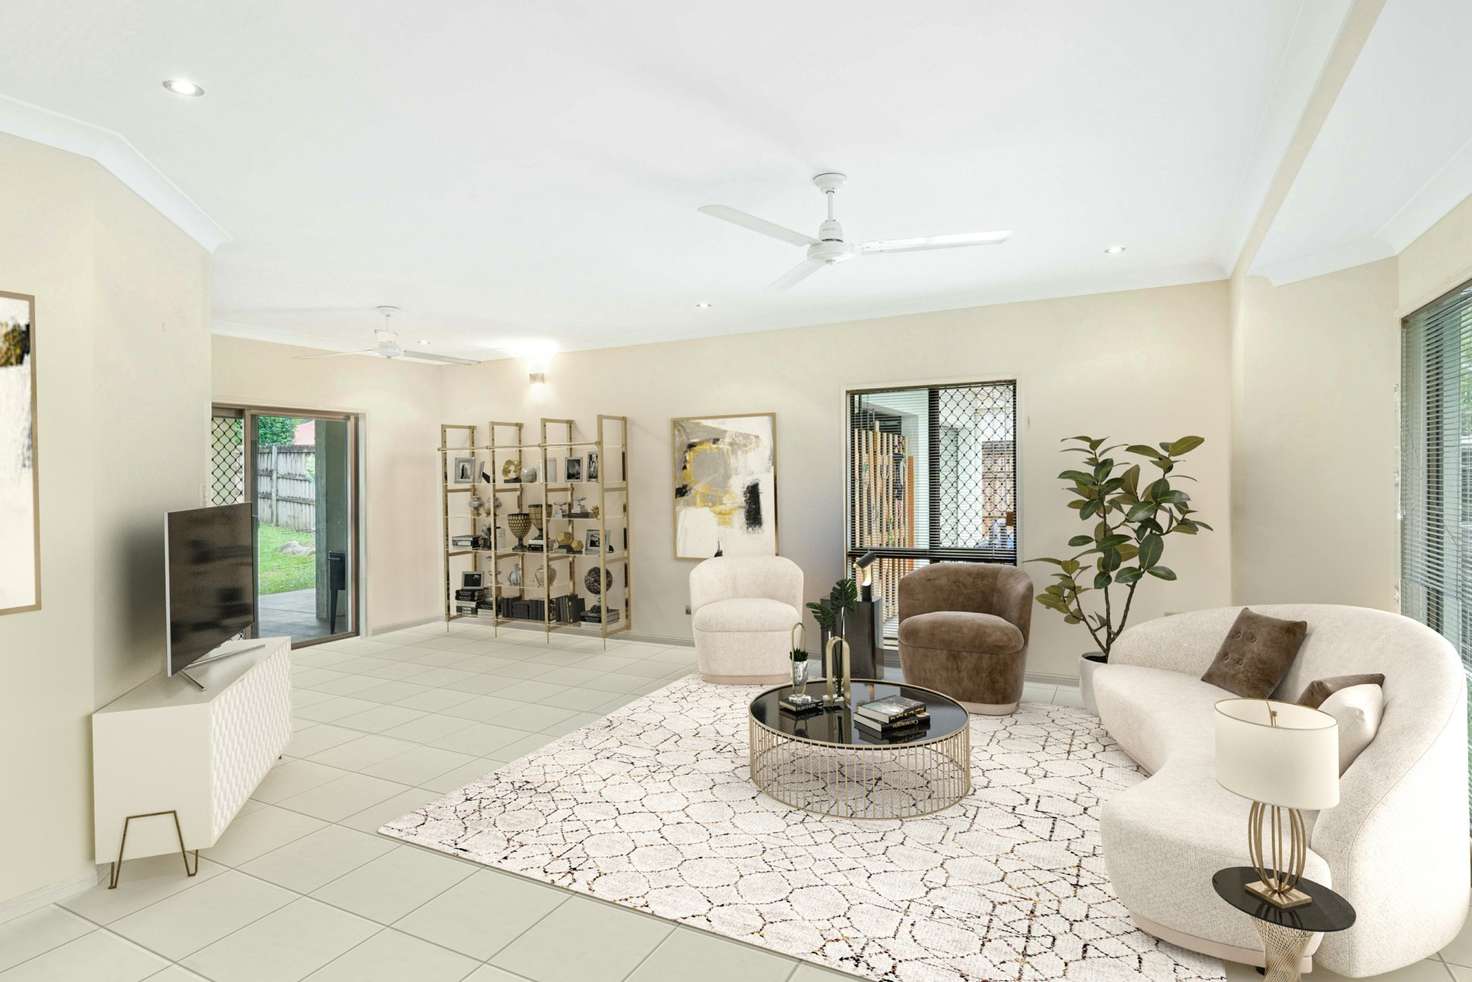 Main view of Homely house listing, 12 Greenford Close, Brinsmead QLD 4870